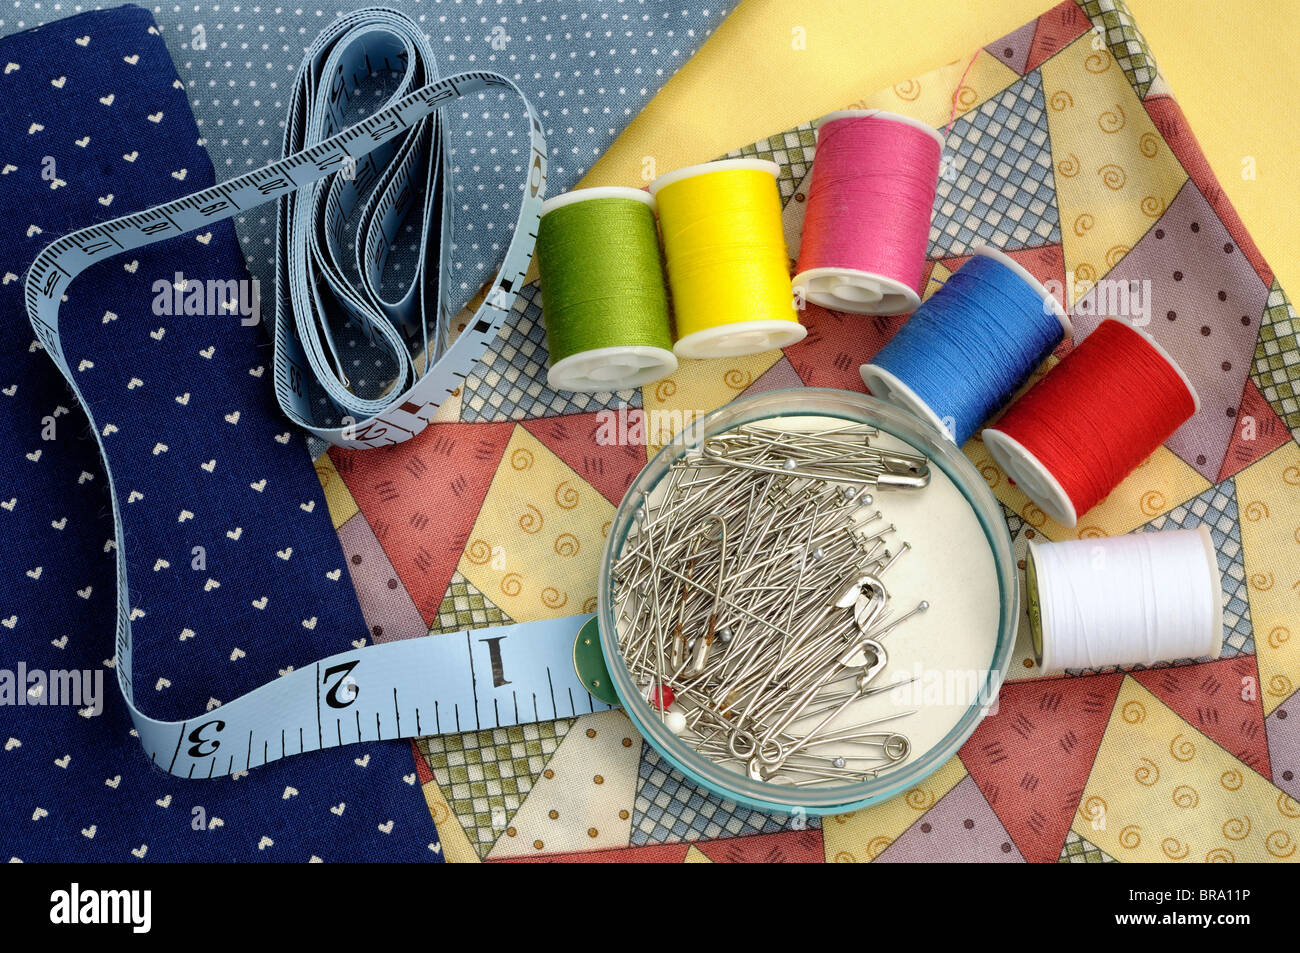 Colorful sewing materials Stock Photo - Alamy